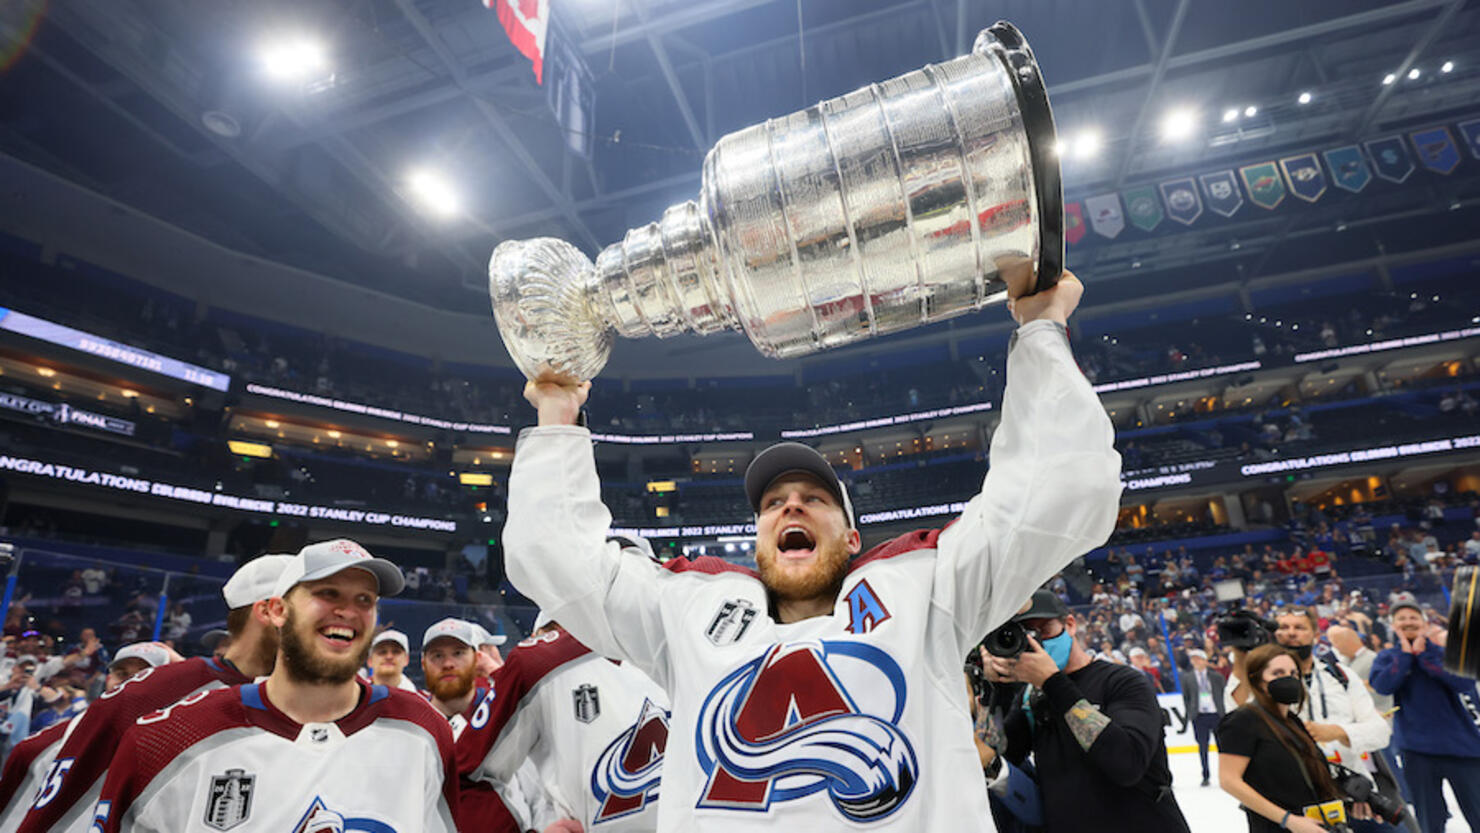 When was the last time the Avalanche won the Stanley Cup